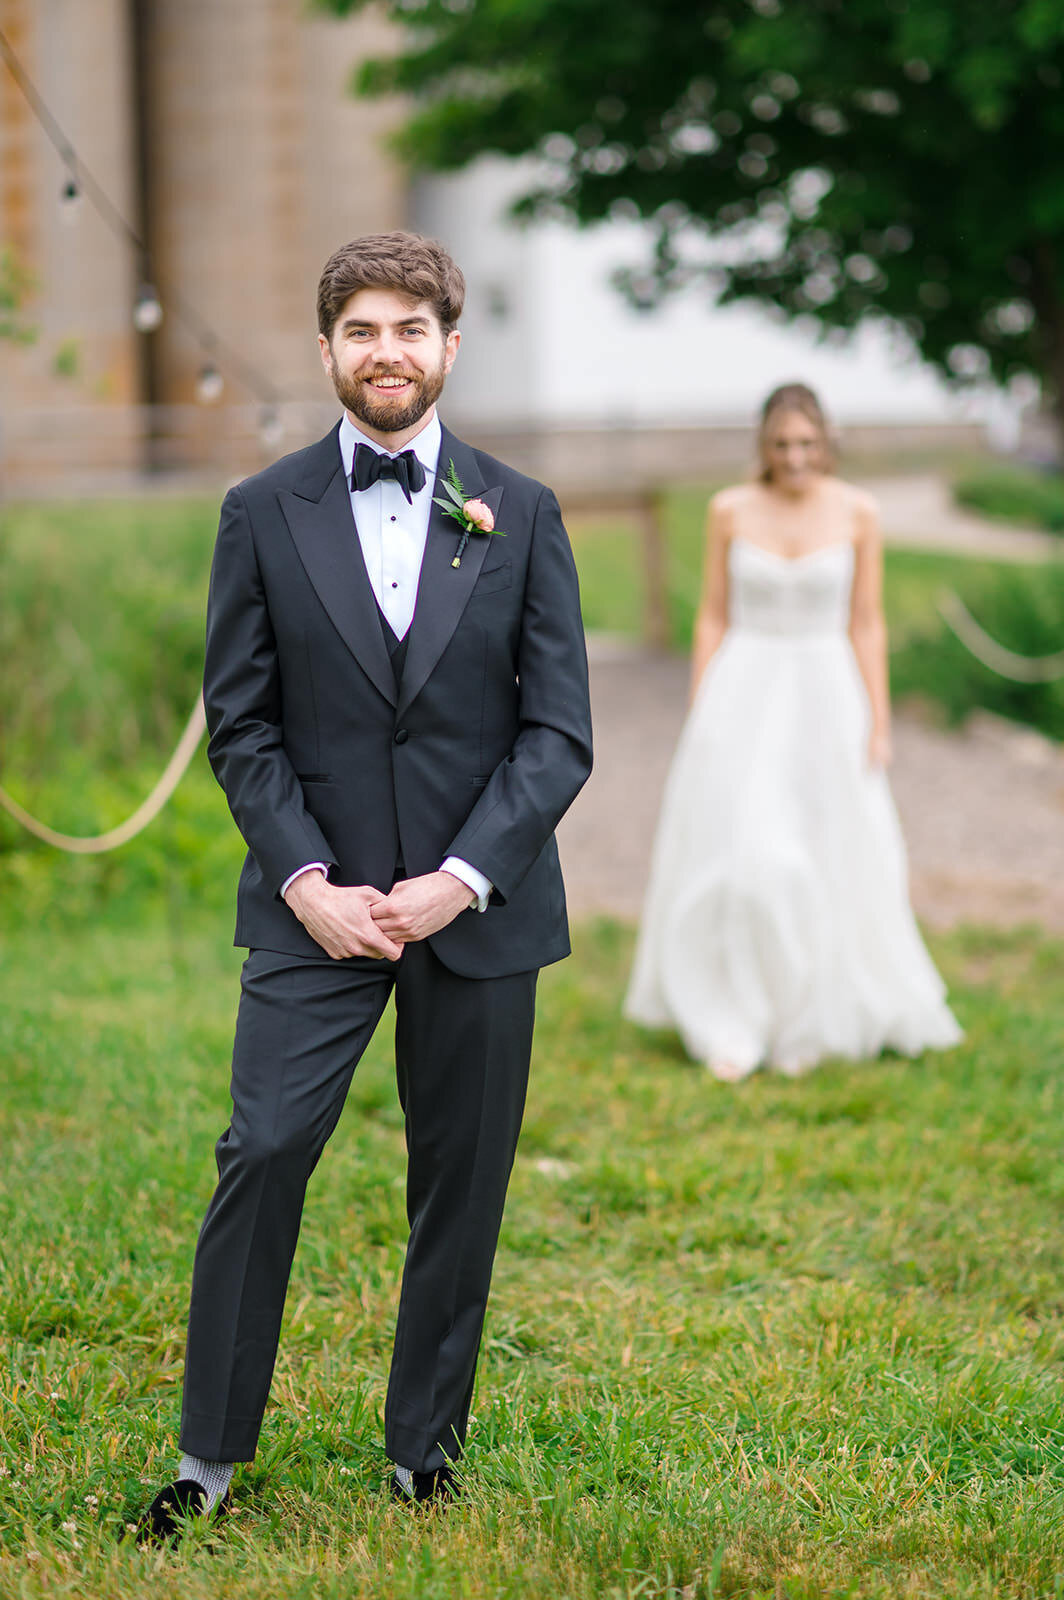 A groom in a classic black tuxedo and bow tie stands handsomely with a bride in a flowing gown blurred in the background in a pastoral setting